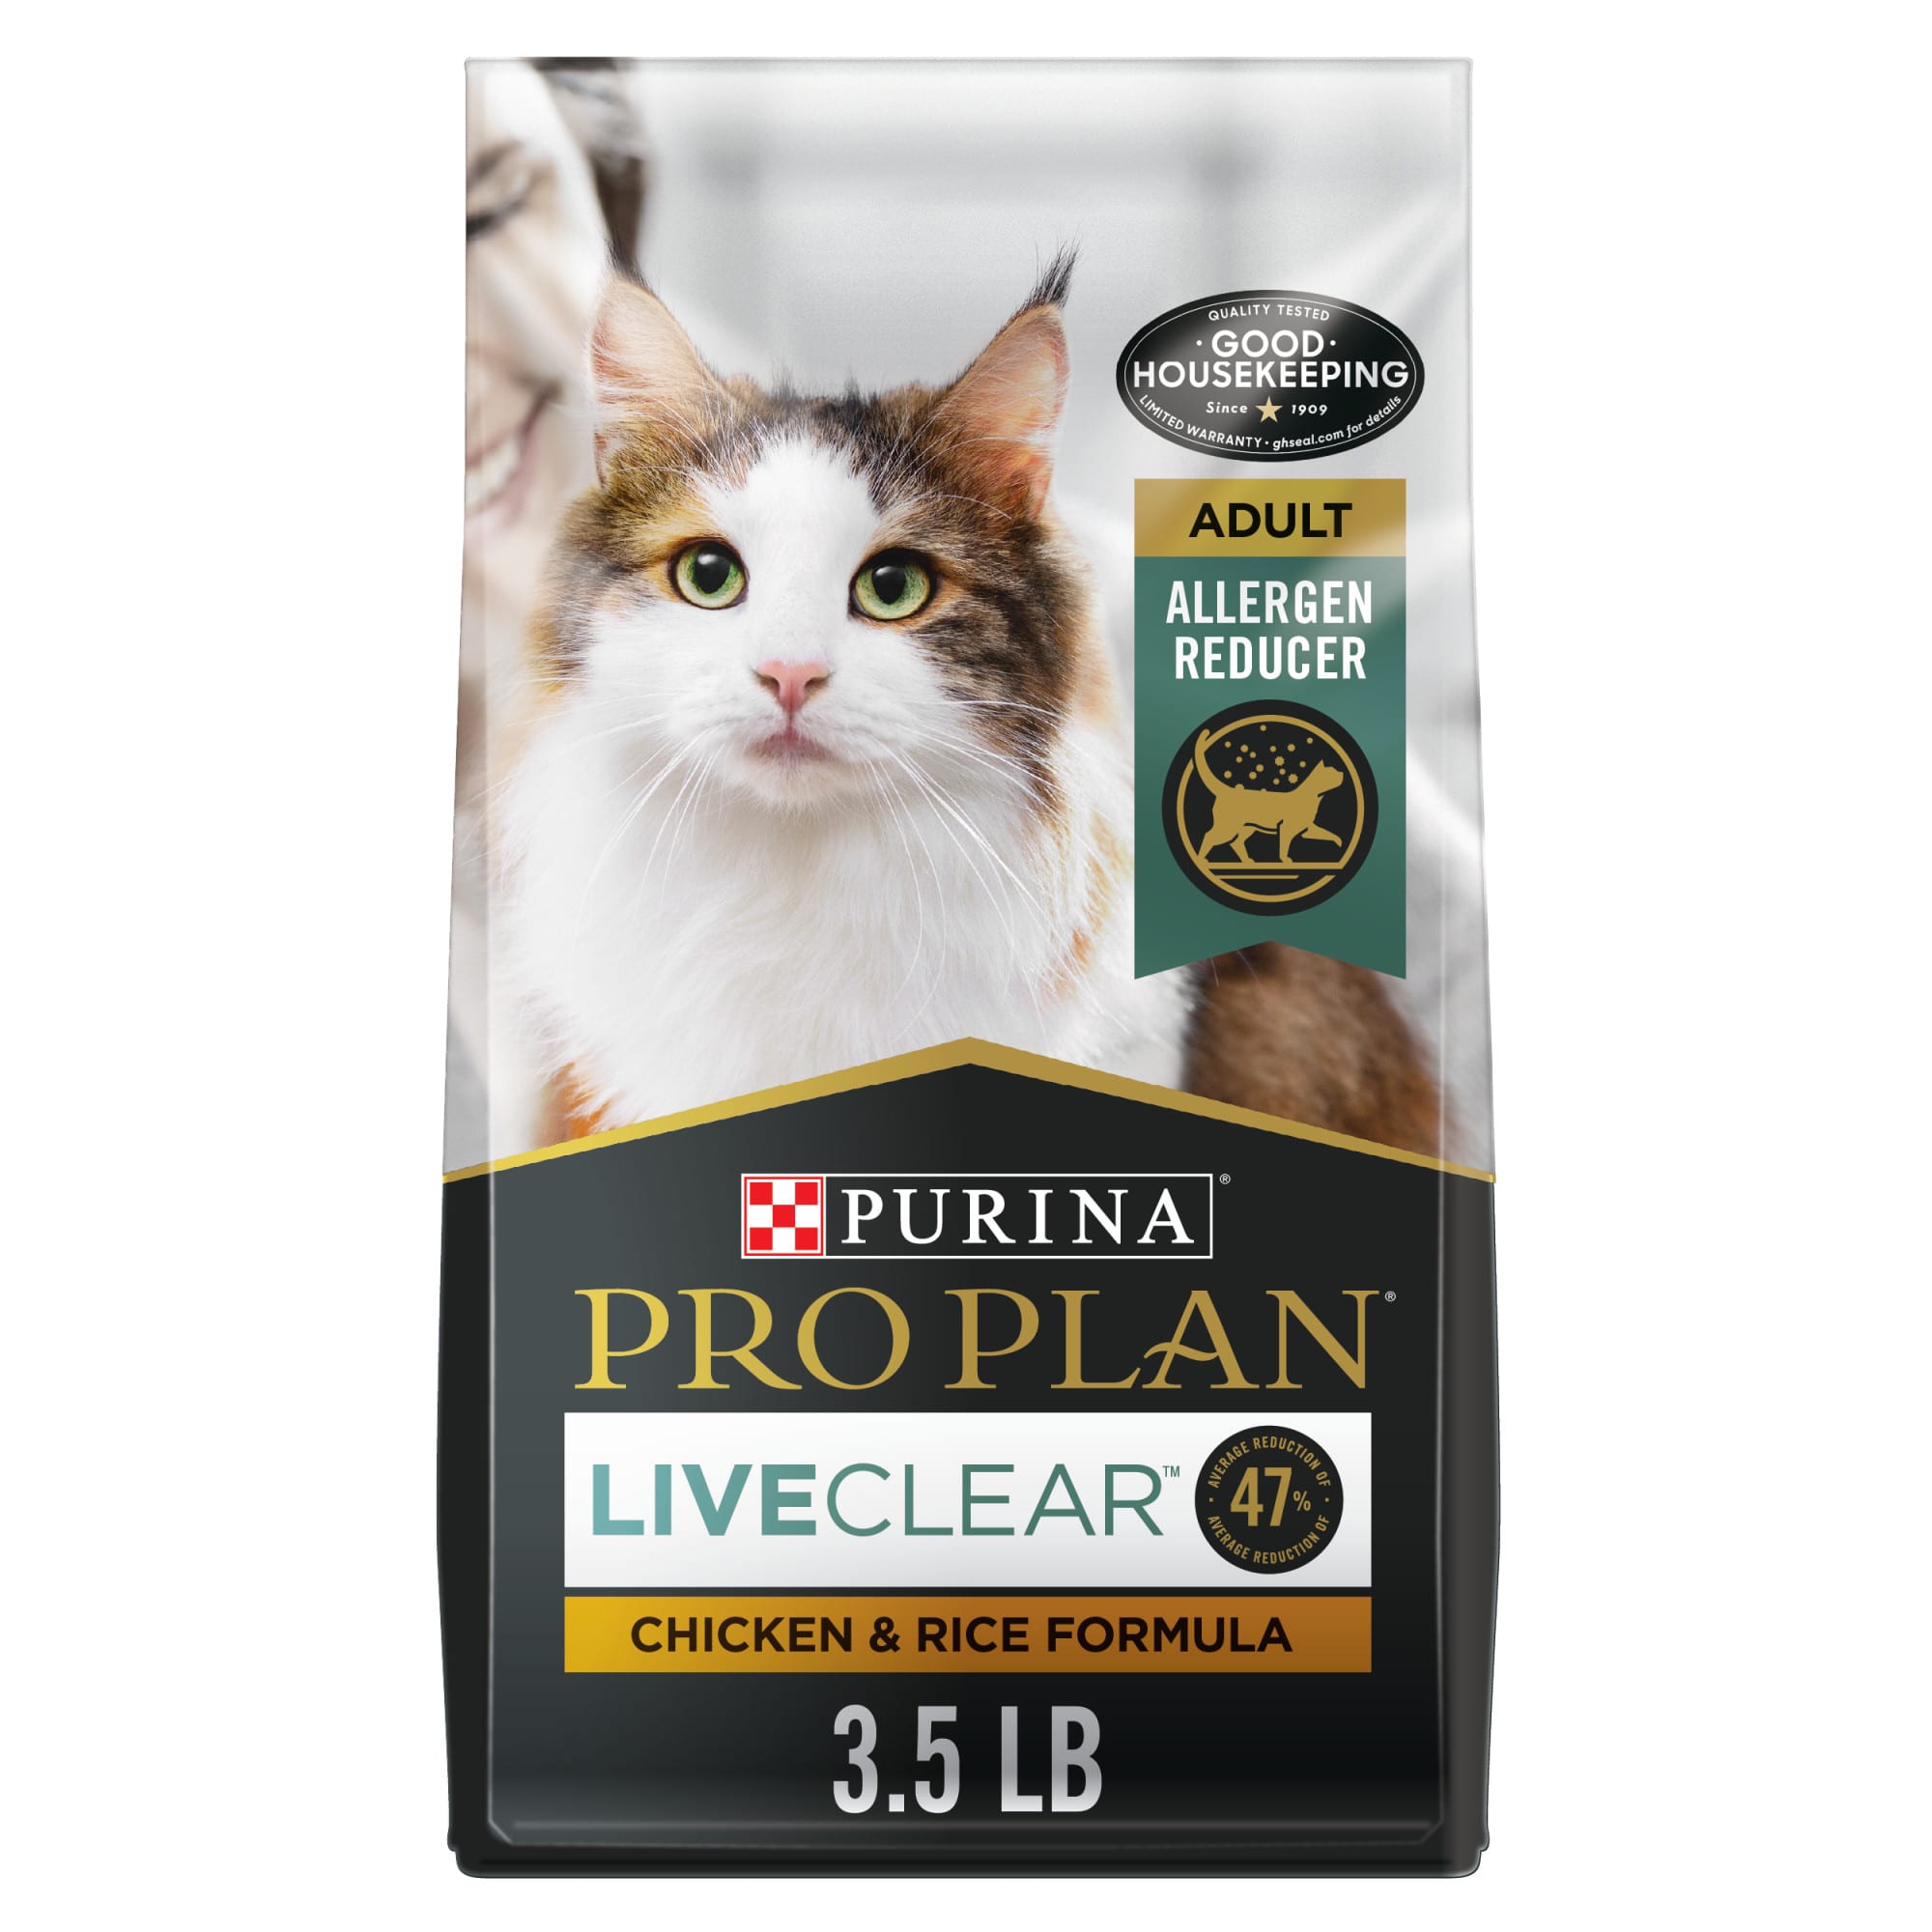 purina-pro-plan-with-probiotics-high-protein-liveclear-chicken-rice